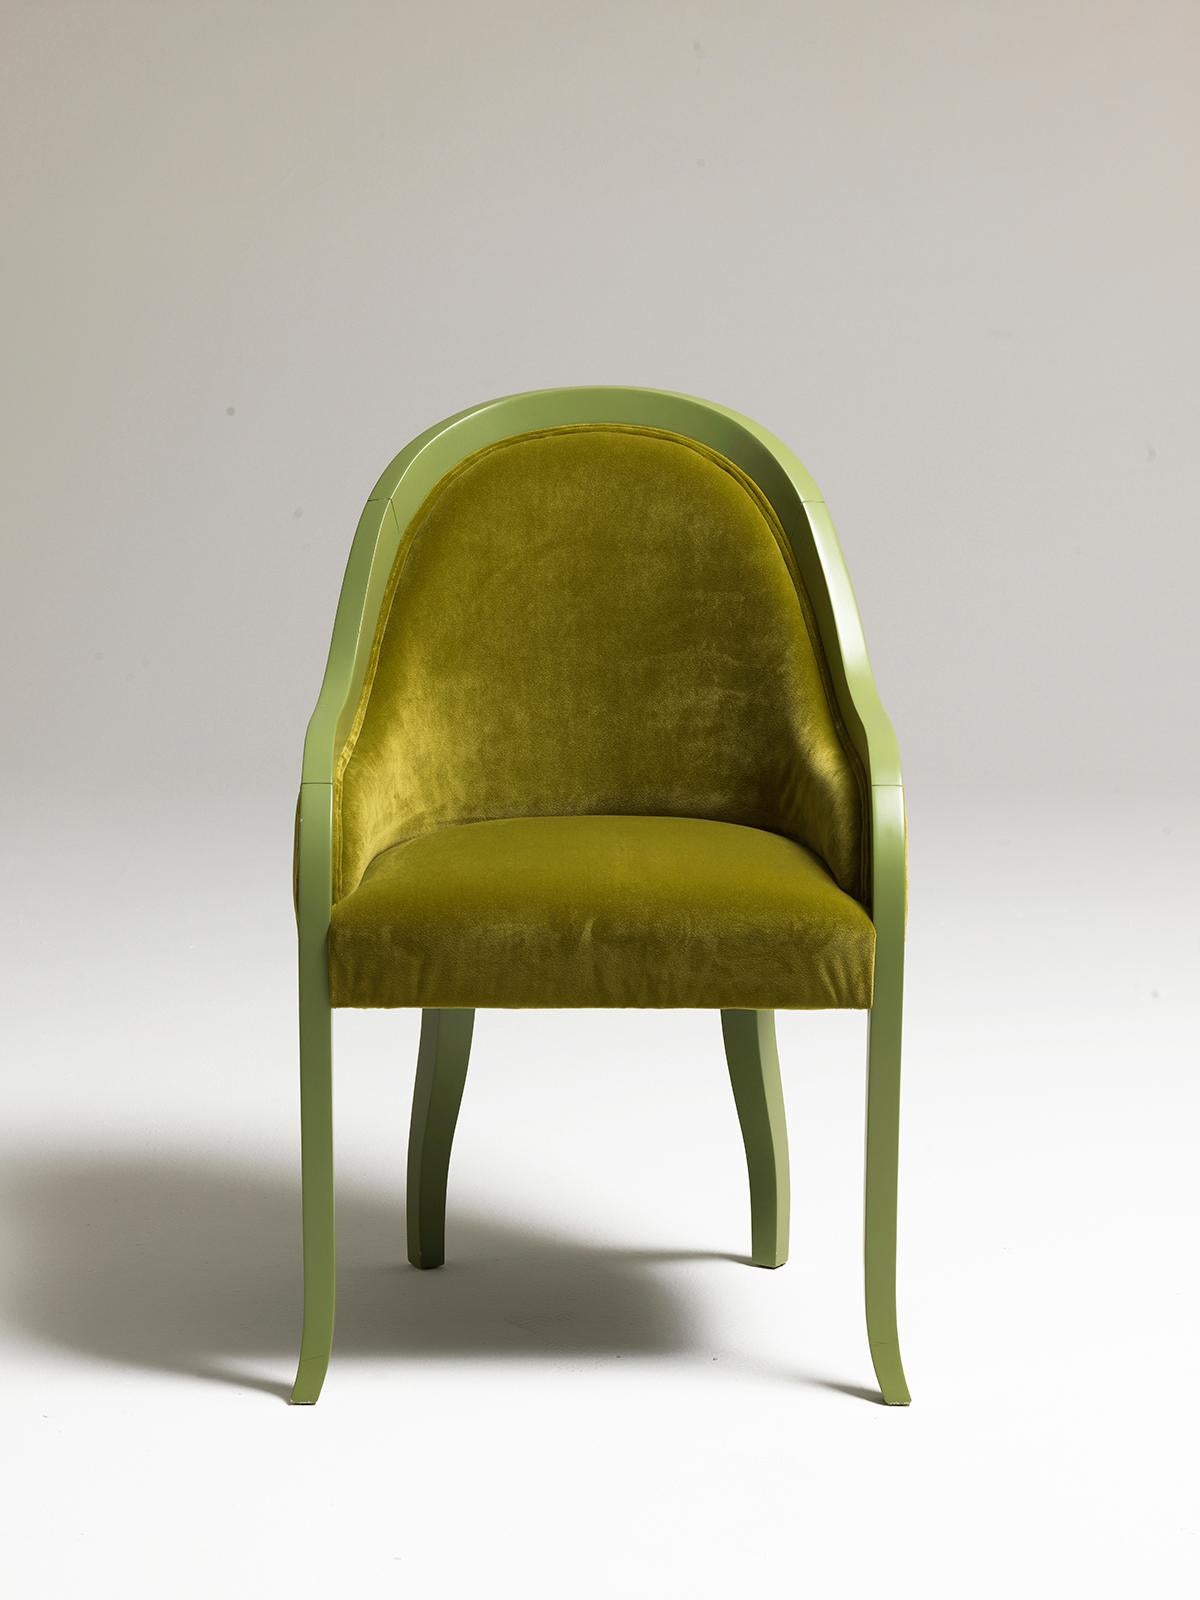 Petunia. Small armchair with rounded and soft shapes, composed by a structure in green lacquered wood and cushioning
covered with precious matching-color velvet. Designed by Aldo Cibic.
A joyful and colorful reinterpretation of a timeless, elegant